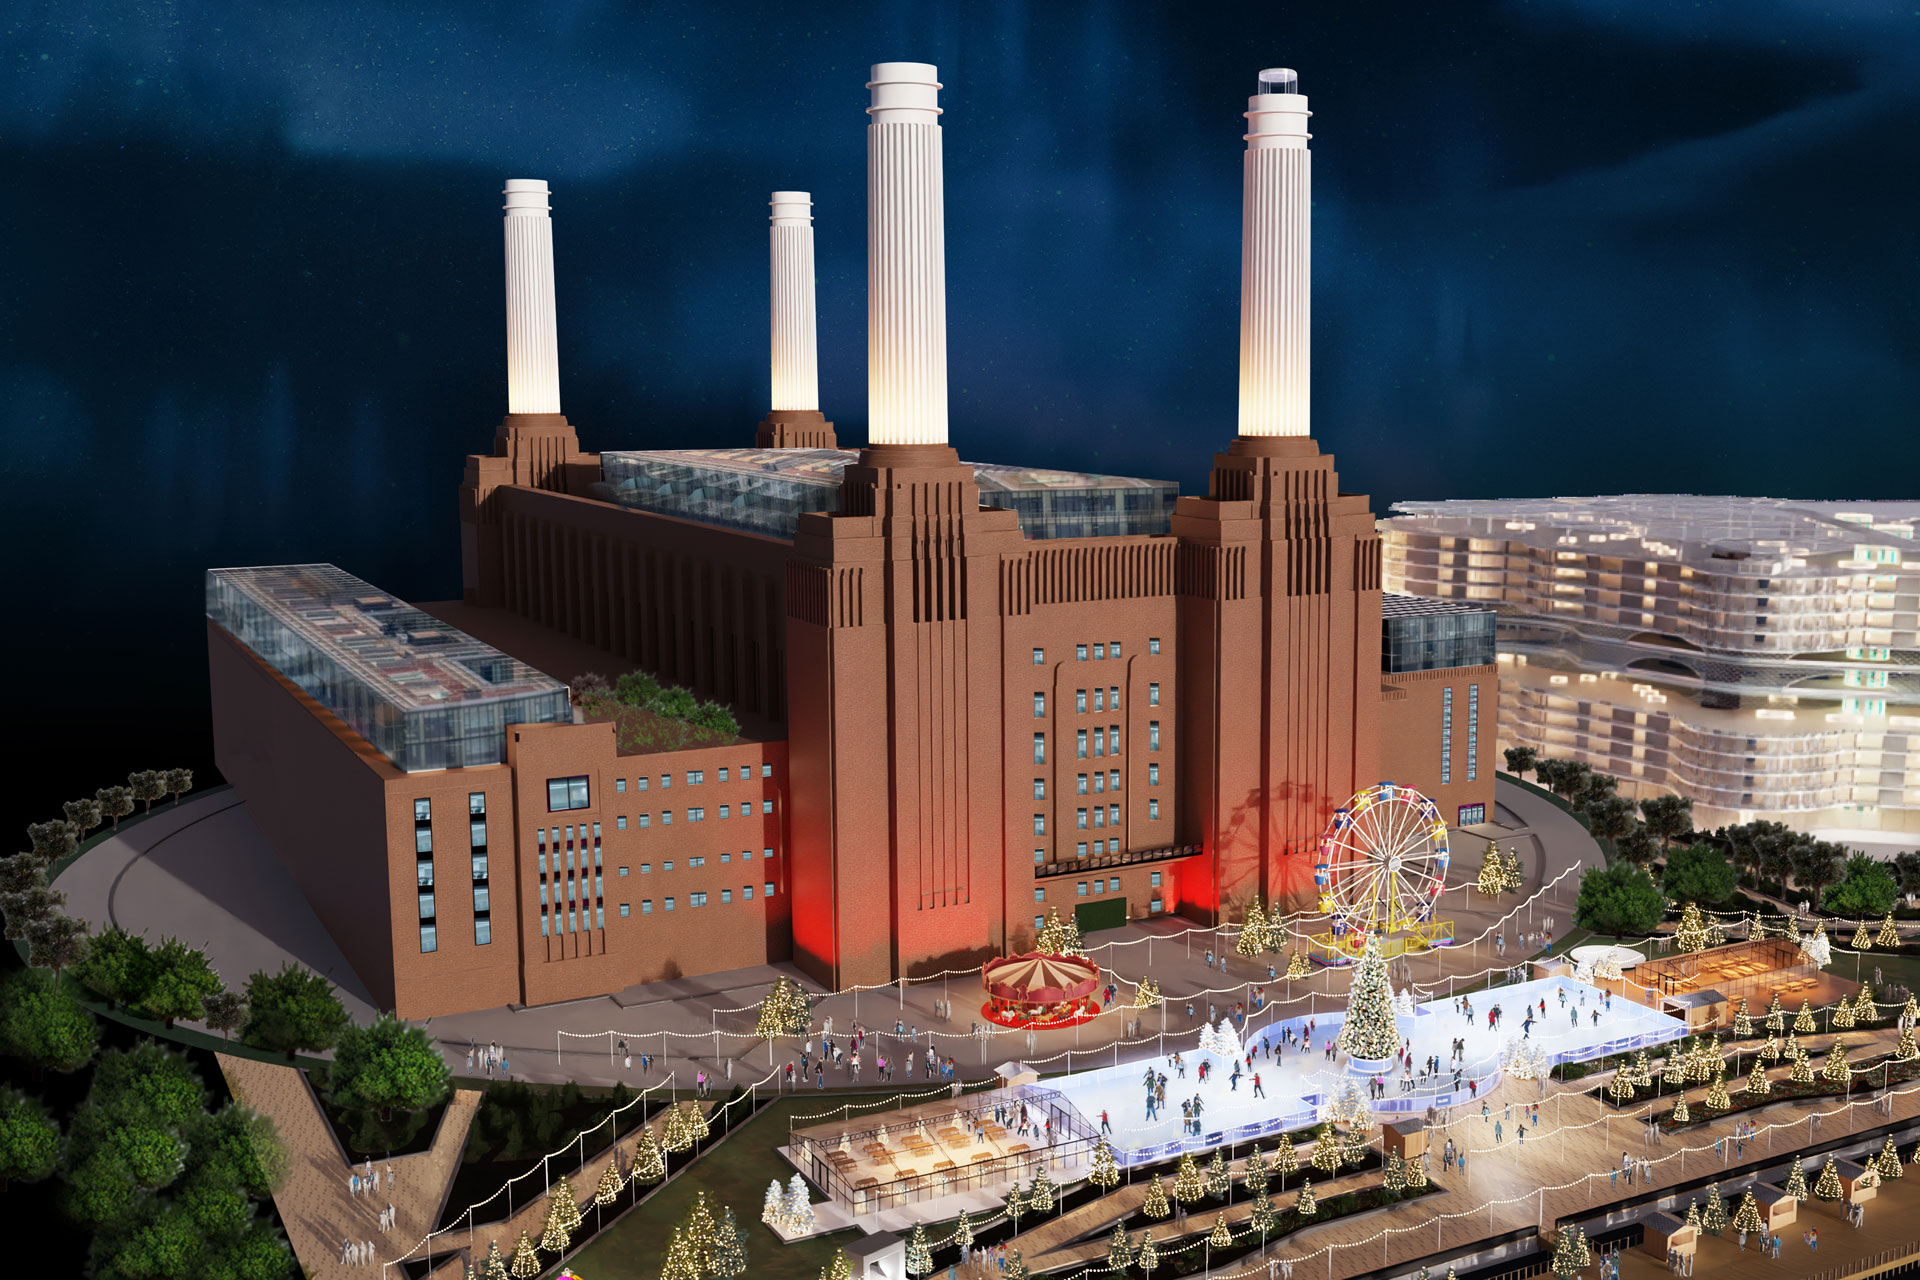 An ice rink at Battersea Power Station